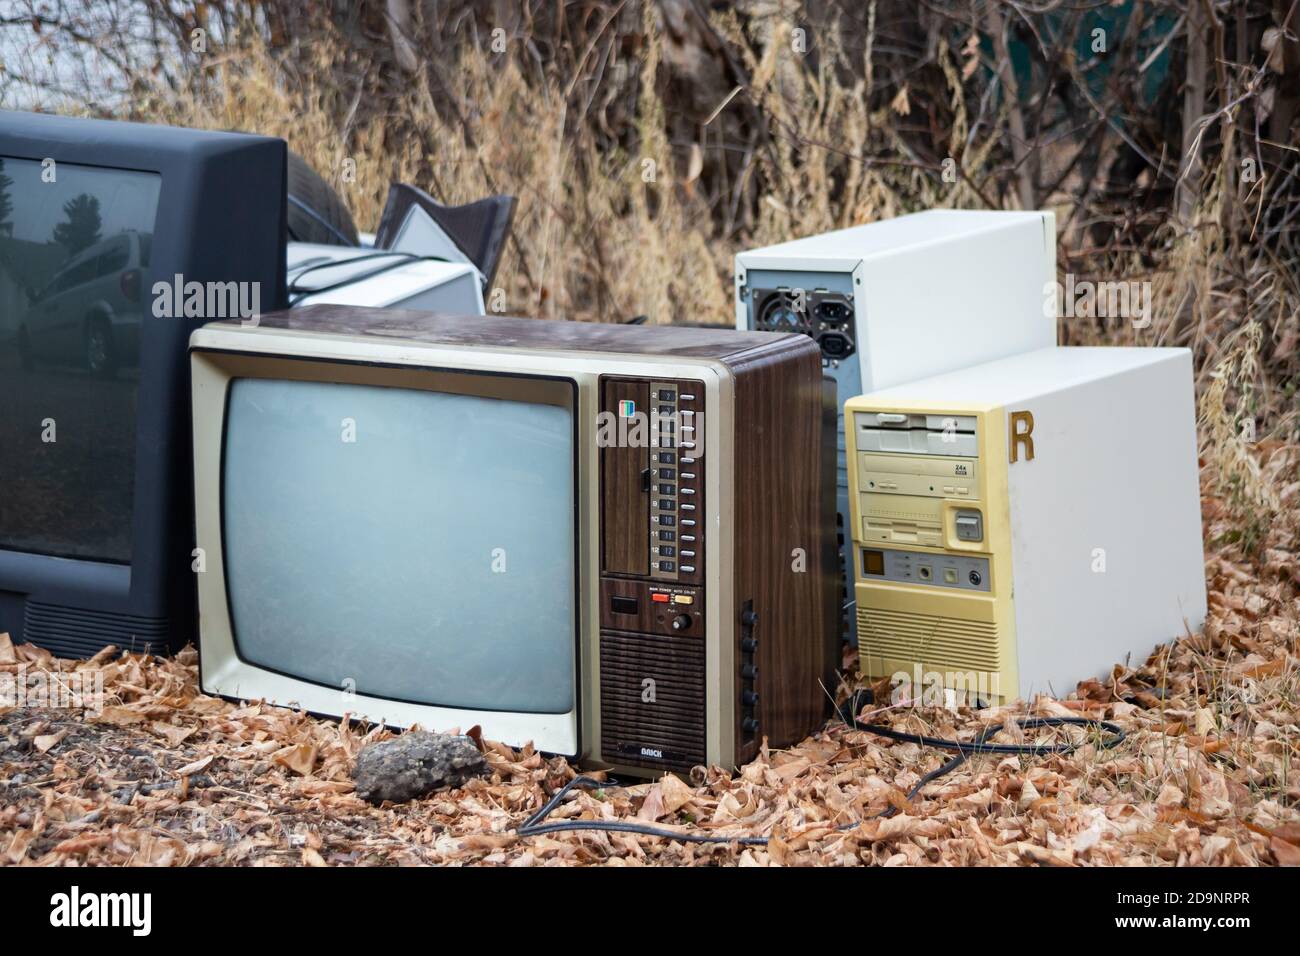 electronic recycling waste, pile of old tv, old computers, old technology waiting for recycle Stock Photo